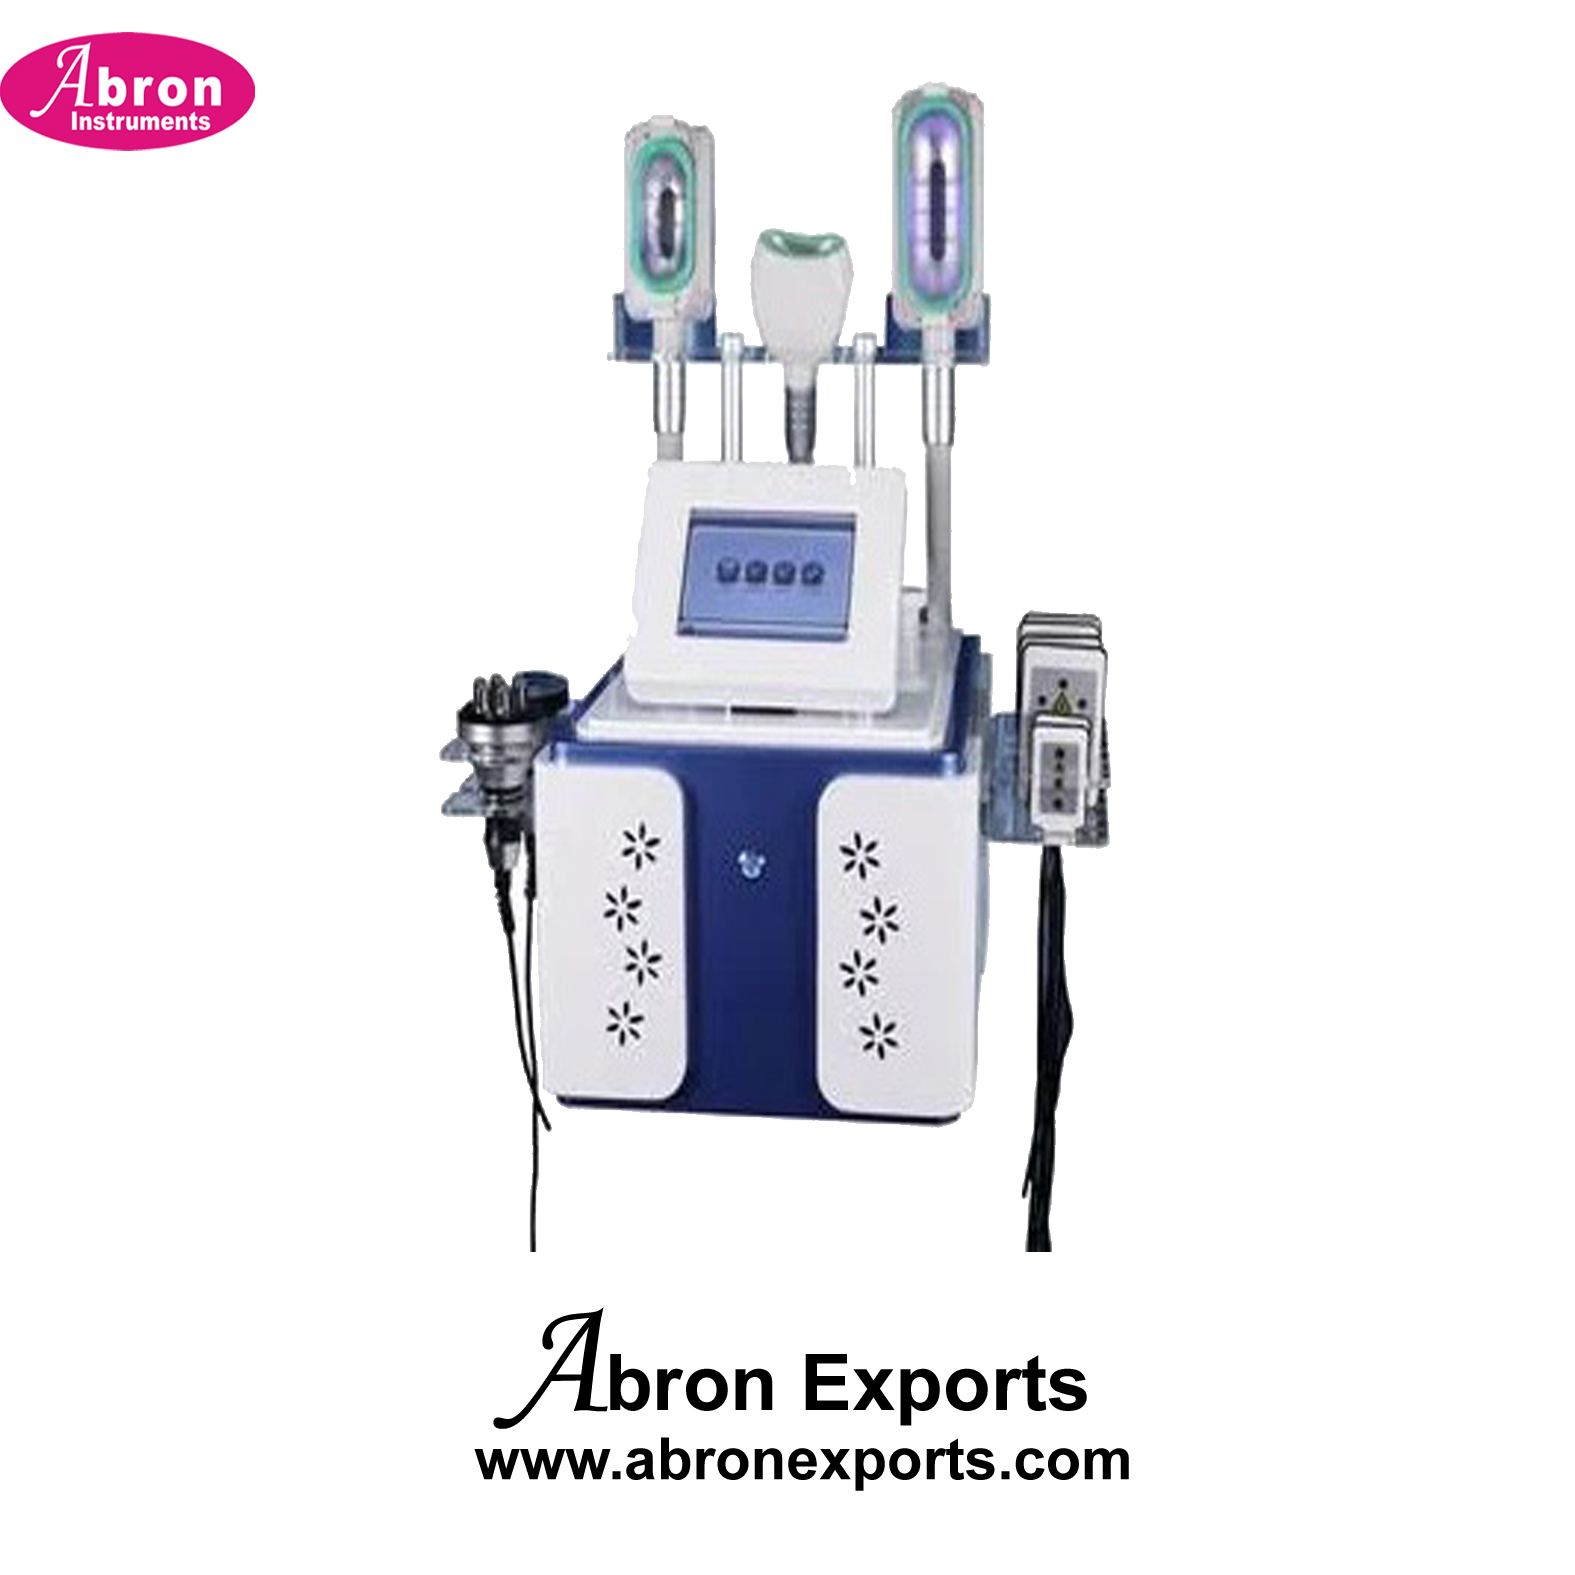 Physiotherapy Clinic Gynacology Cryoflow Cryotherapy Unit Machine Limming Abron ABM-1610M 